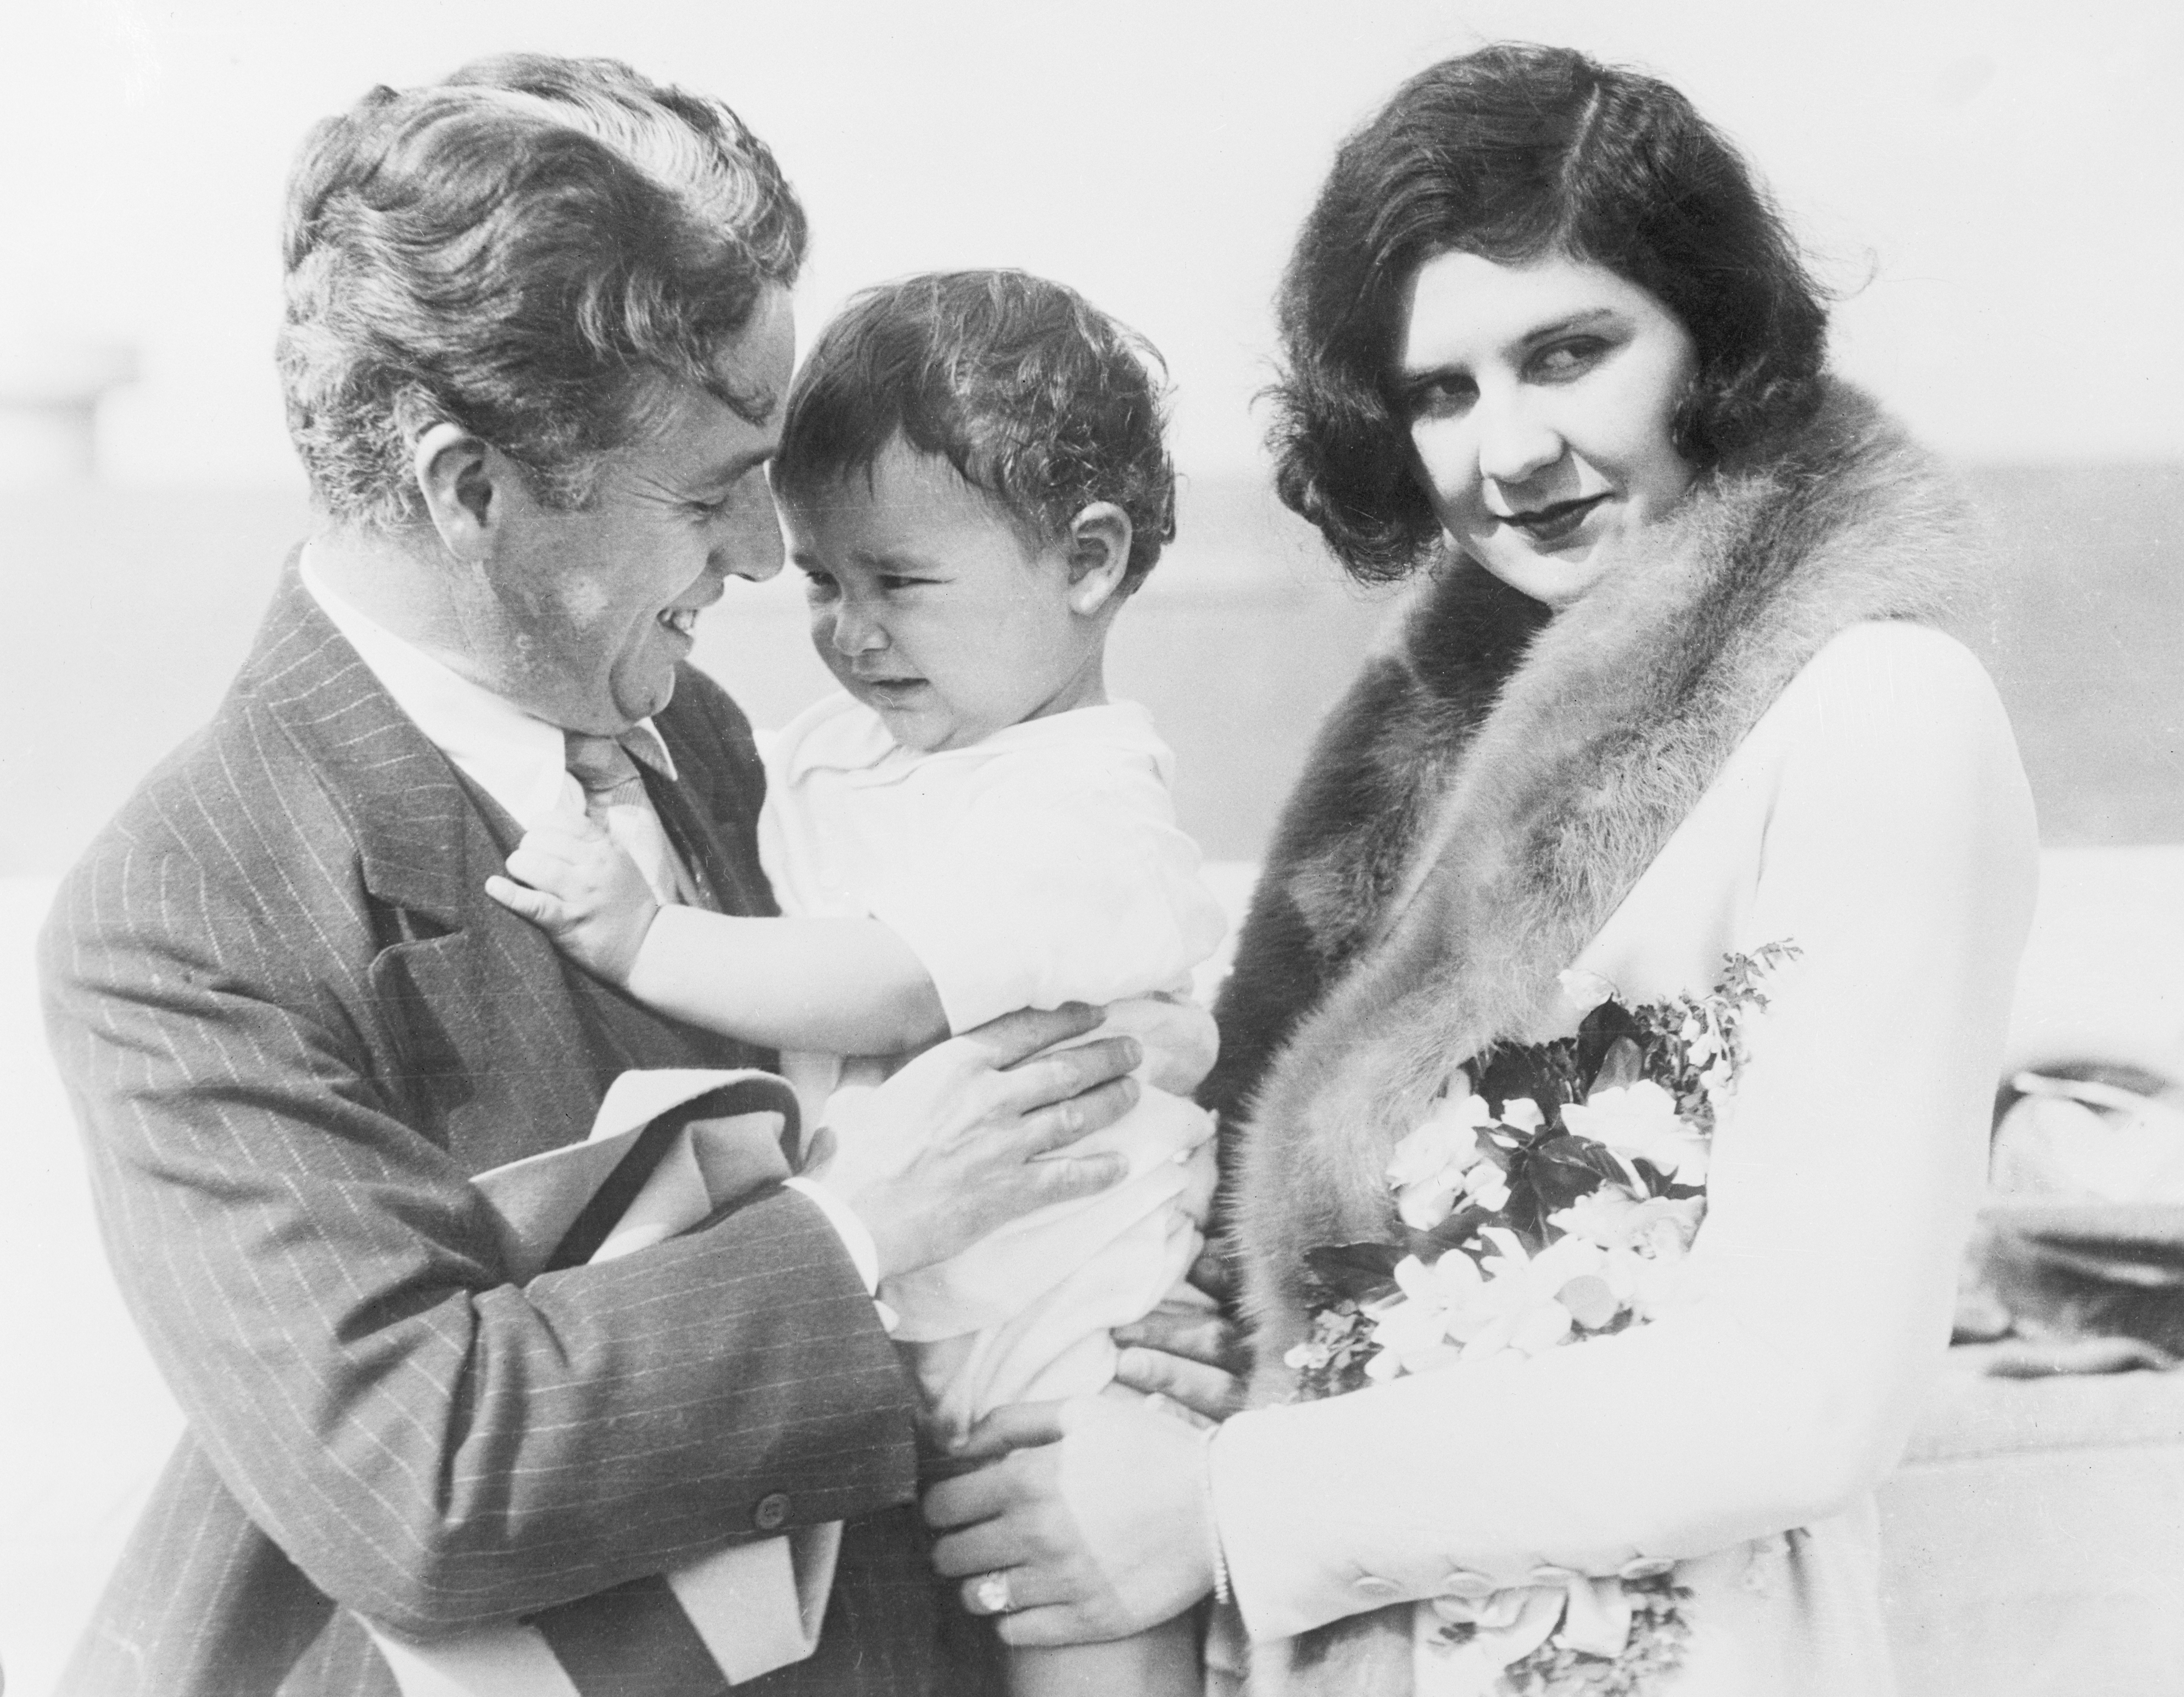 Charlie Chaplin, his second wife, Lita Grey, and their baby son, Charles Jr., photographed on board the SS City of Los Angeles in November 1926 | Source: Getty Images